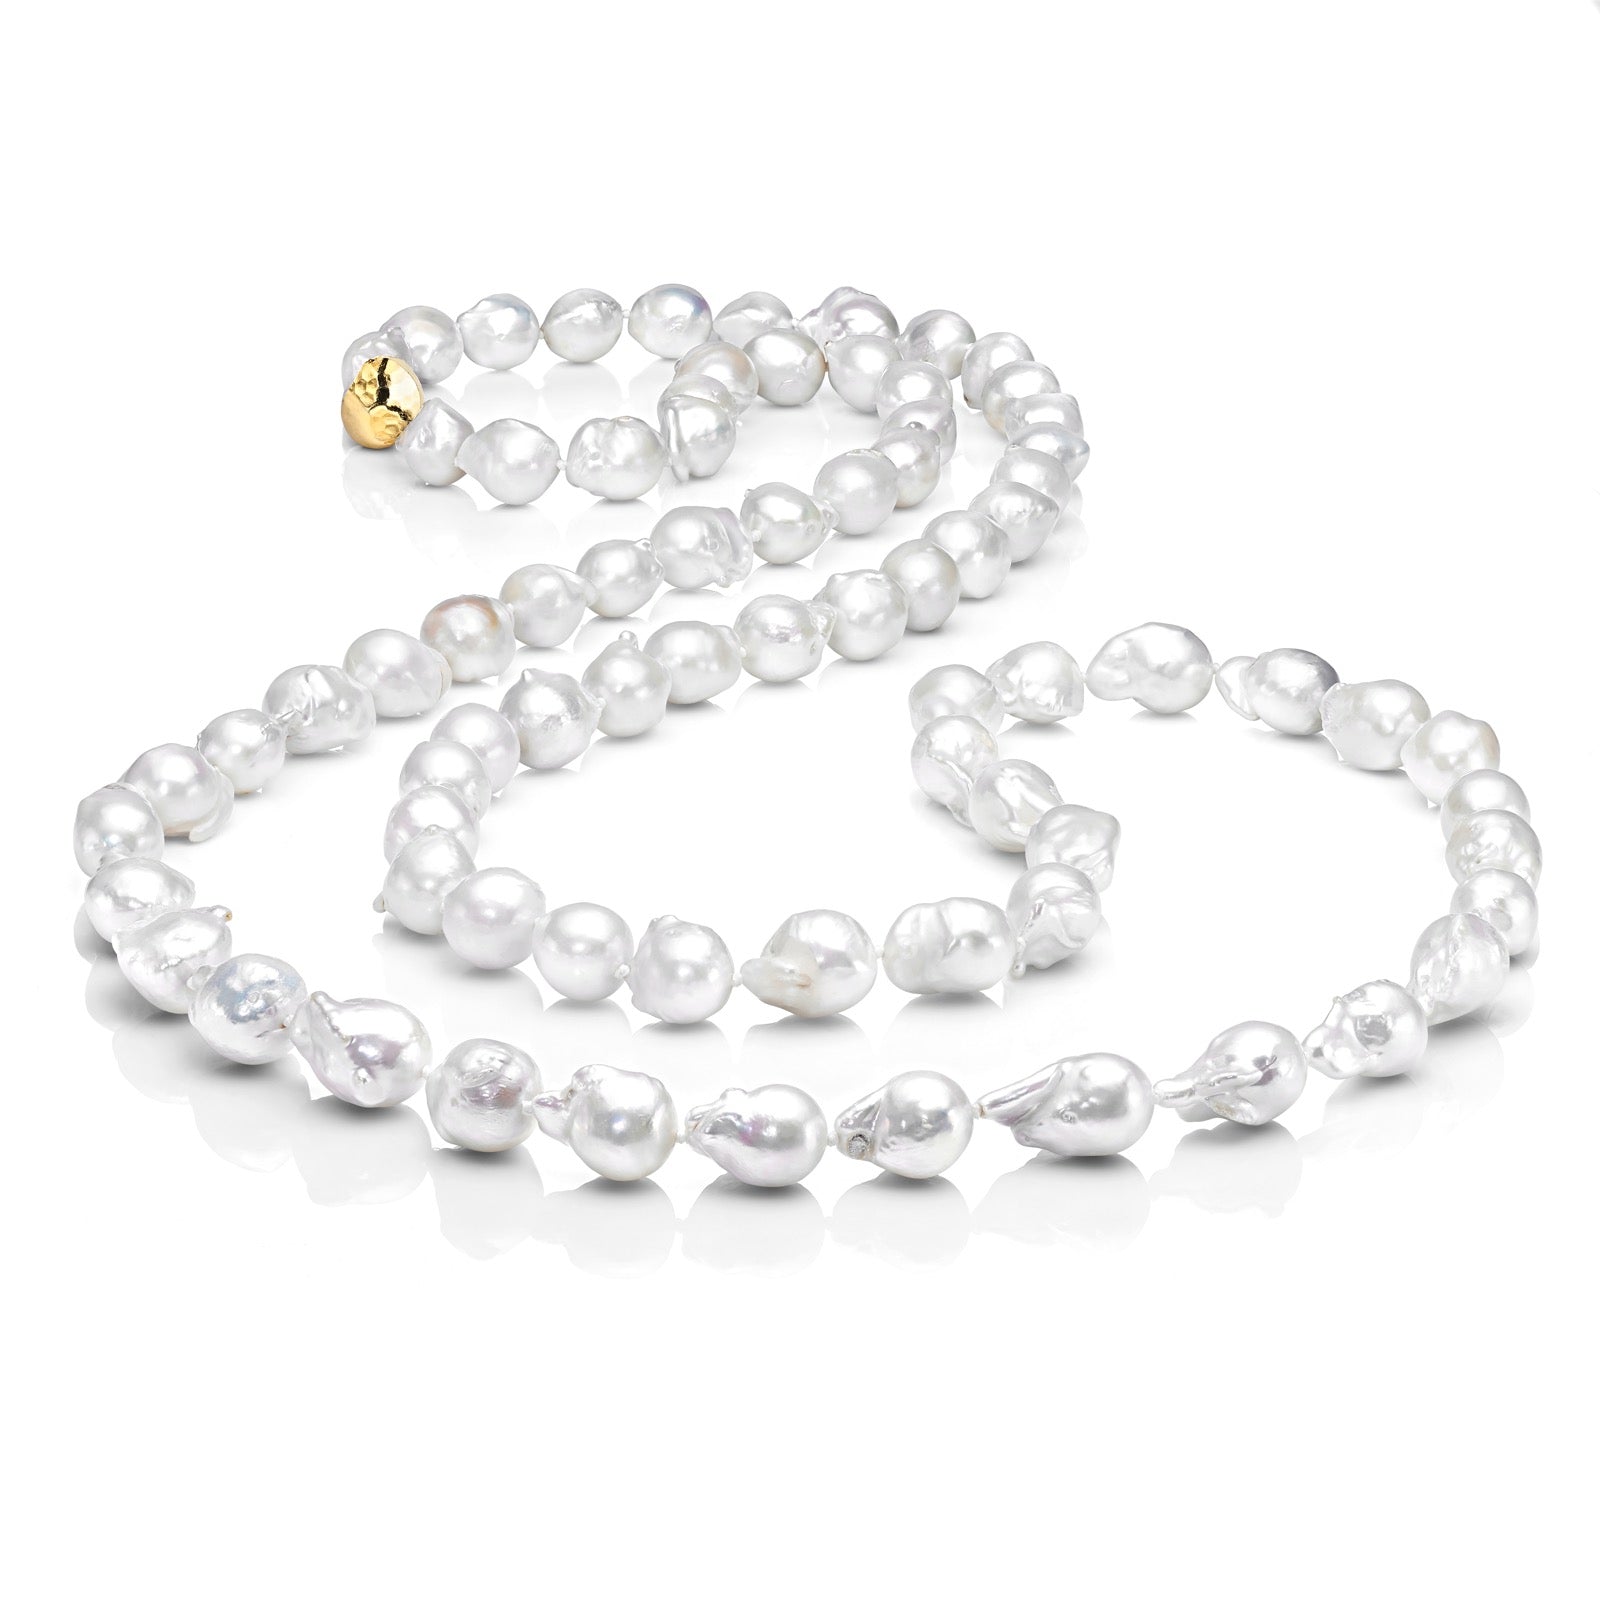 Les Trois Corniches Large White Baroque Freshwater Pearl Necklace ~ Go ...